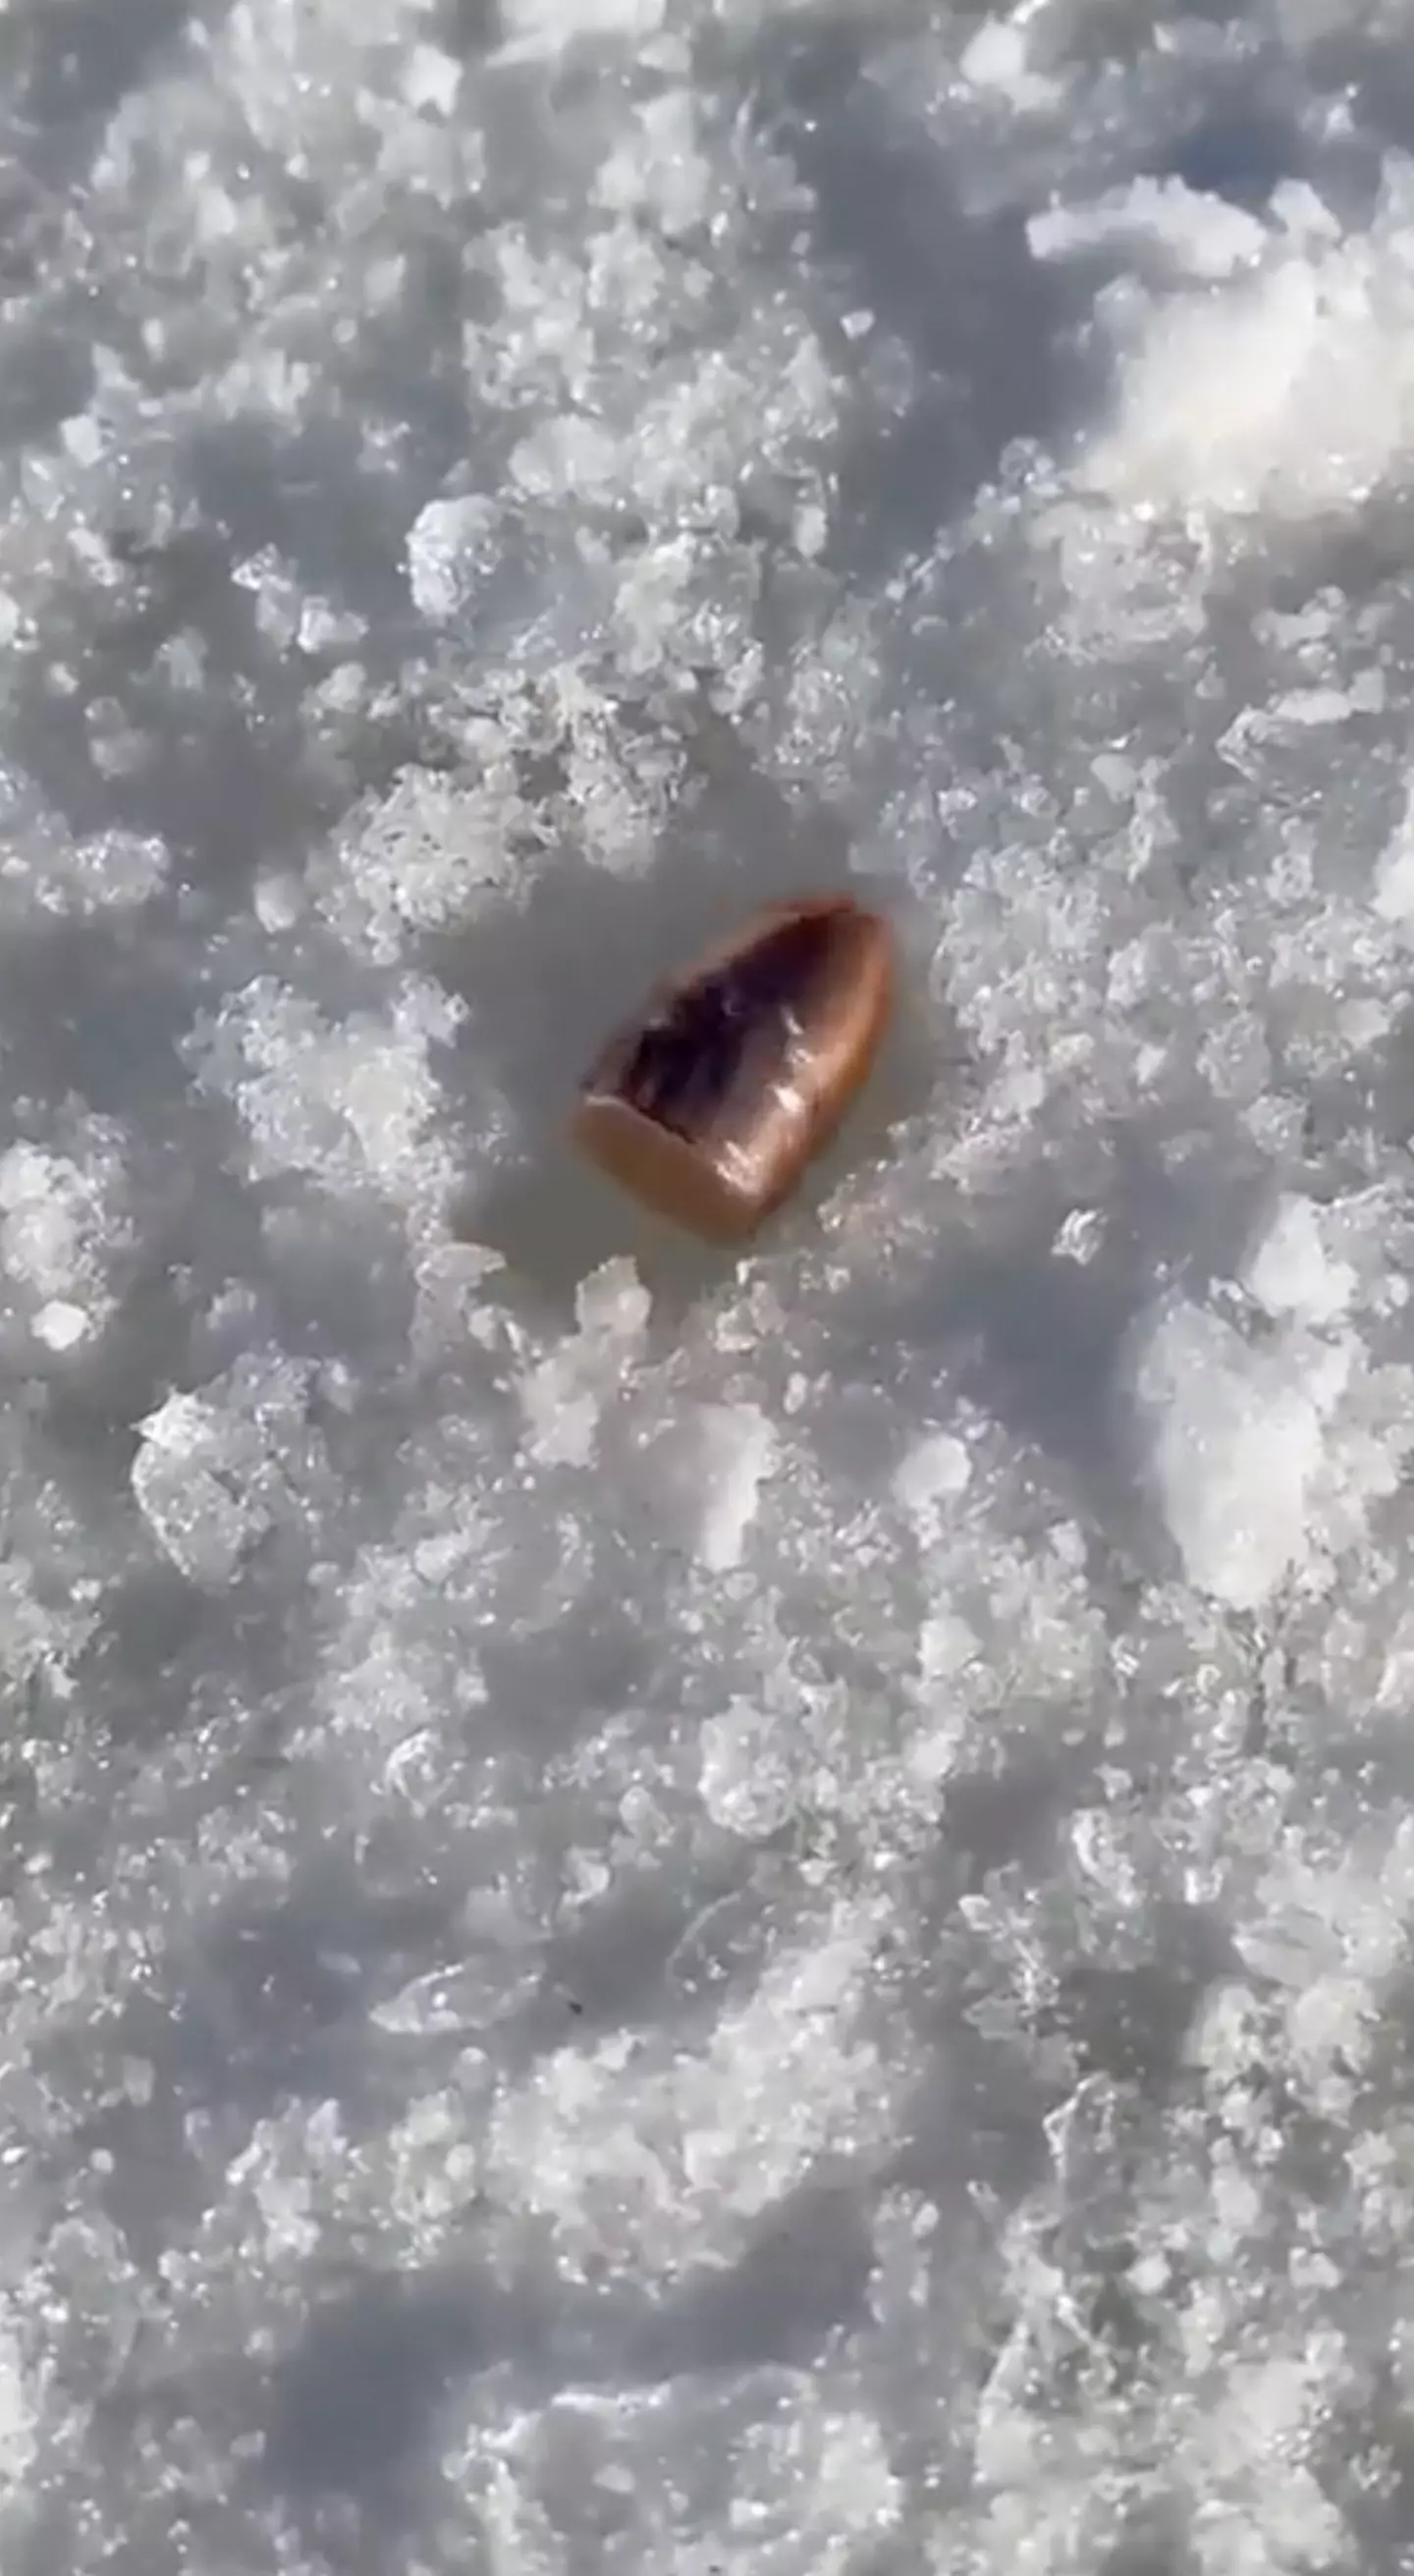 Bullets spin when shot directly into ice.